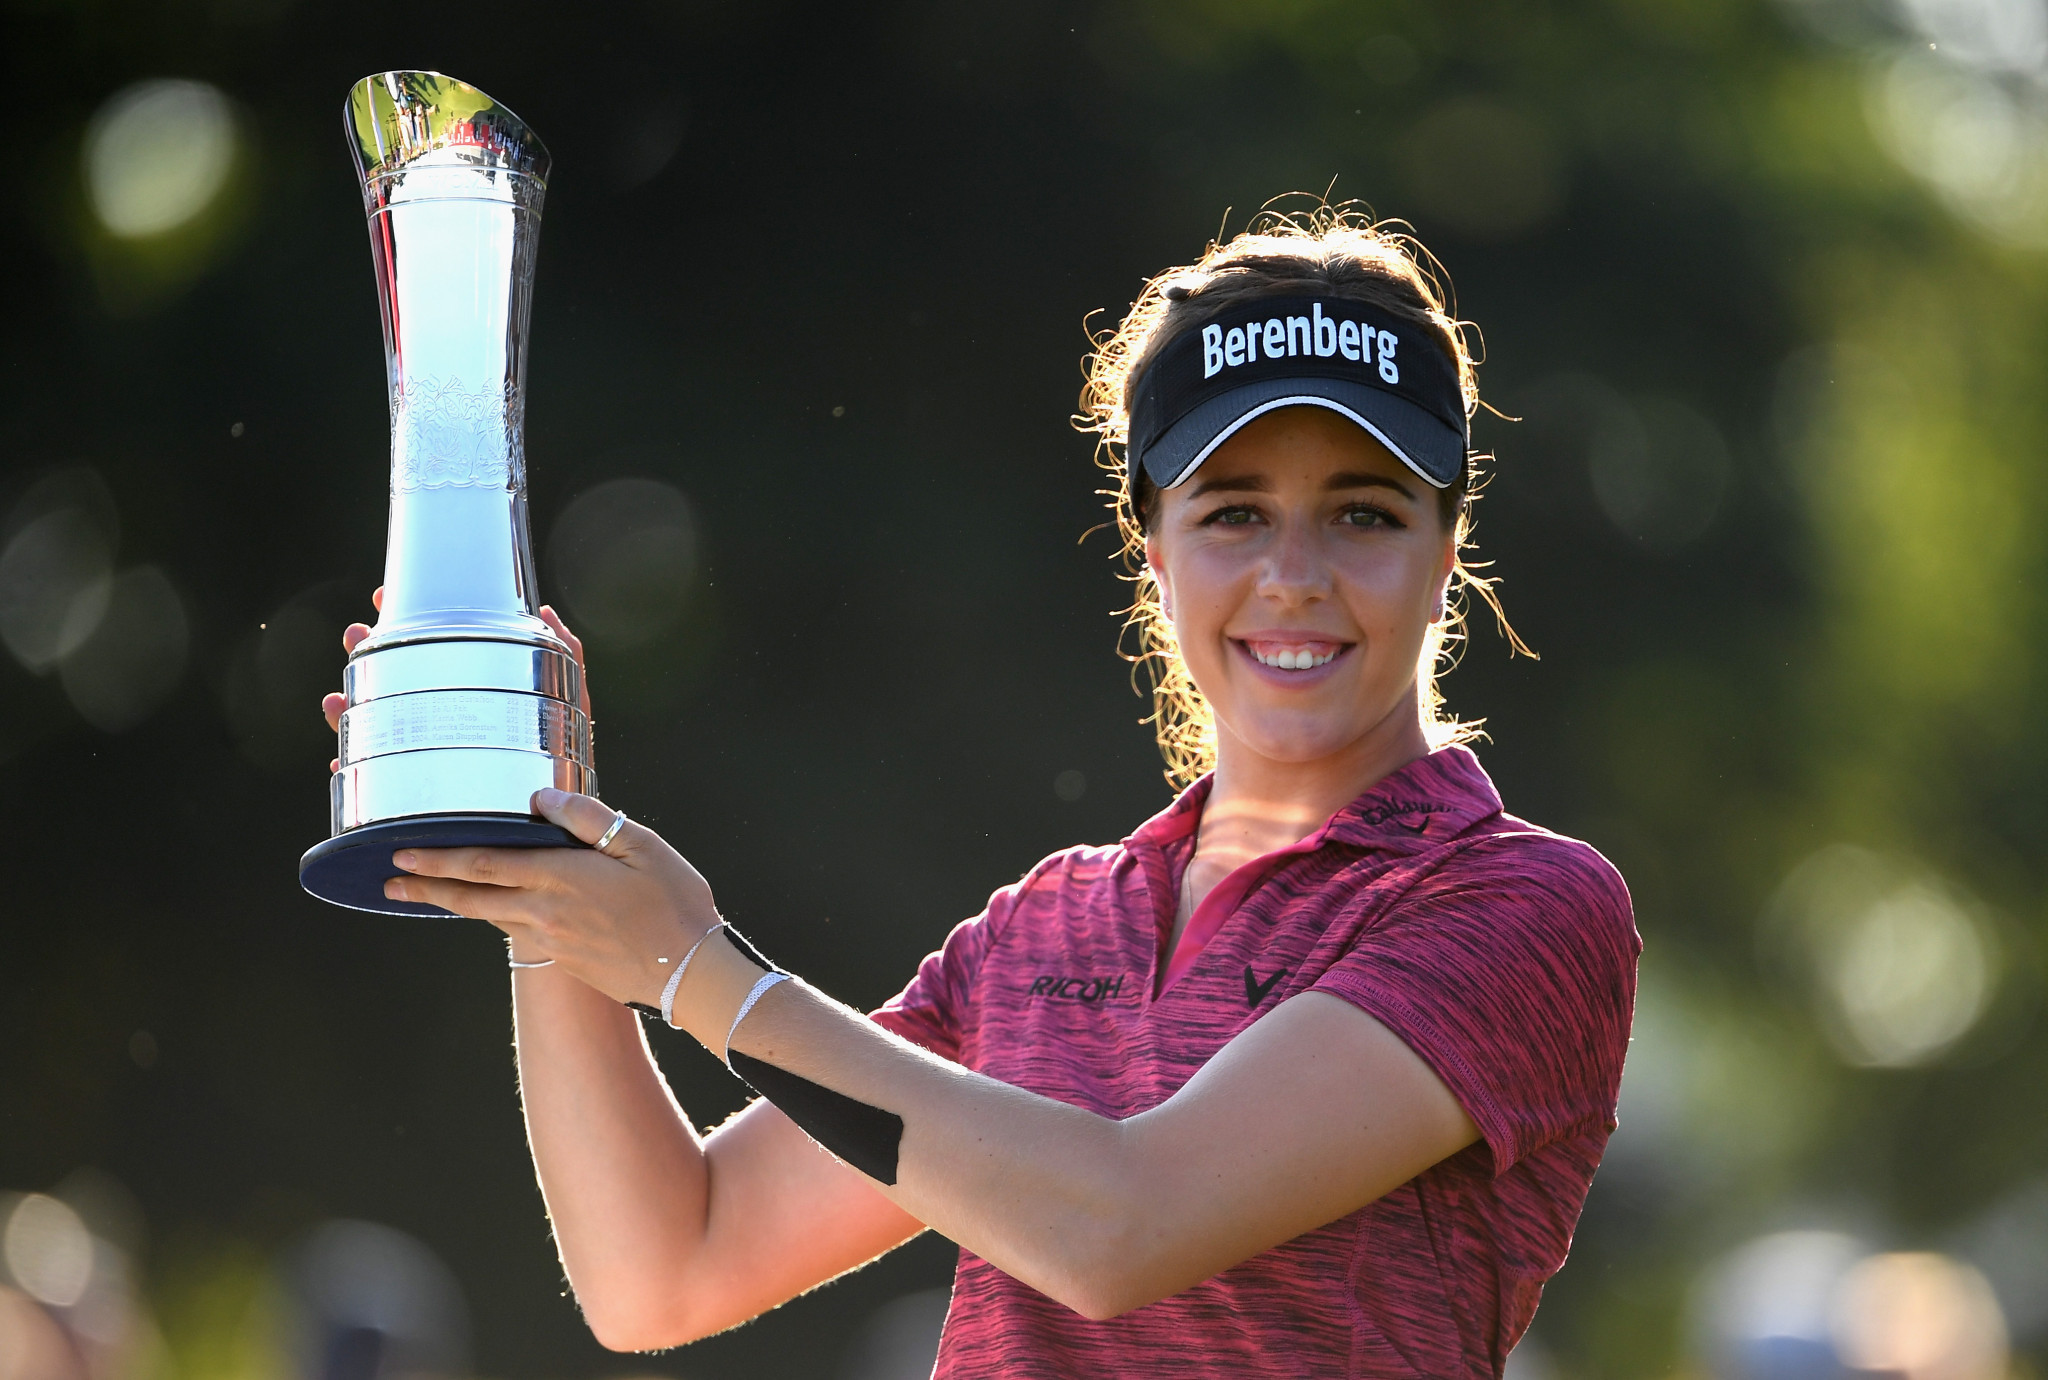 Georgia Hall won the 2018 Women's British Open at Royal Lytham and St Annes ©Getty Images